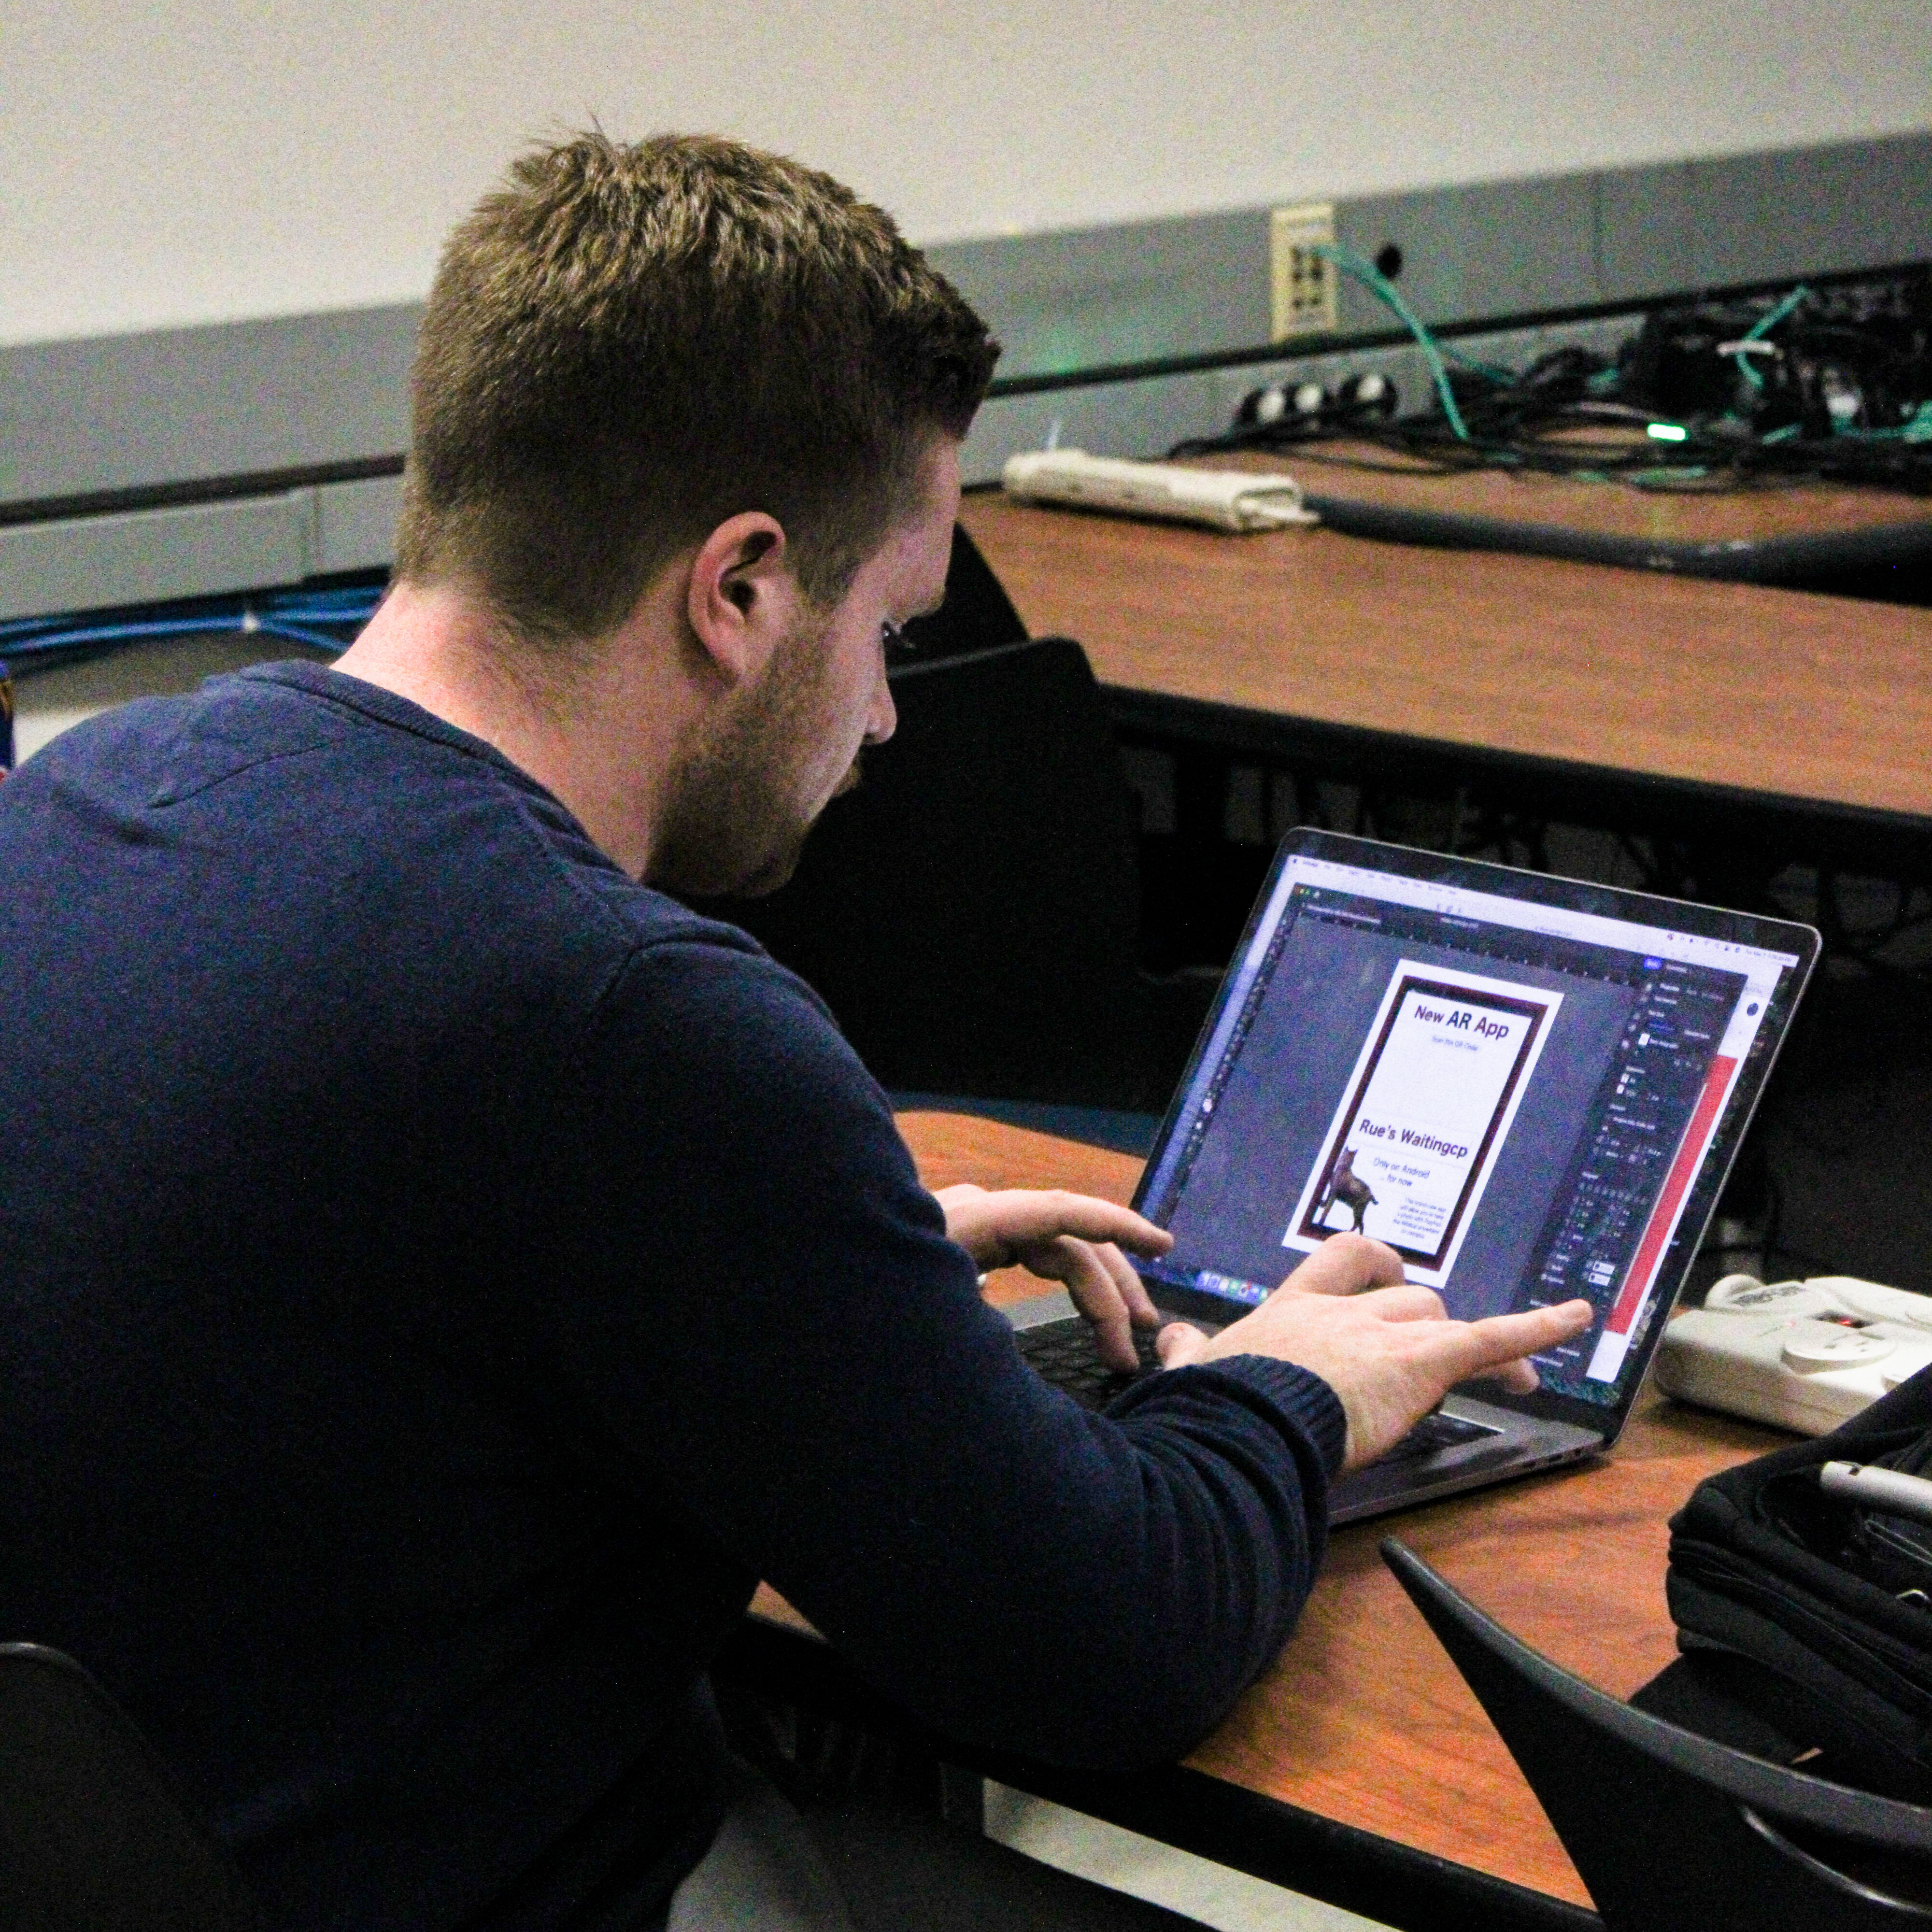 Josh Mannix working on designing for the app.